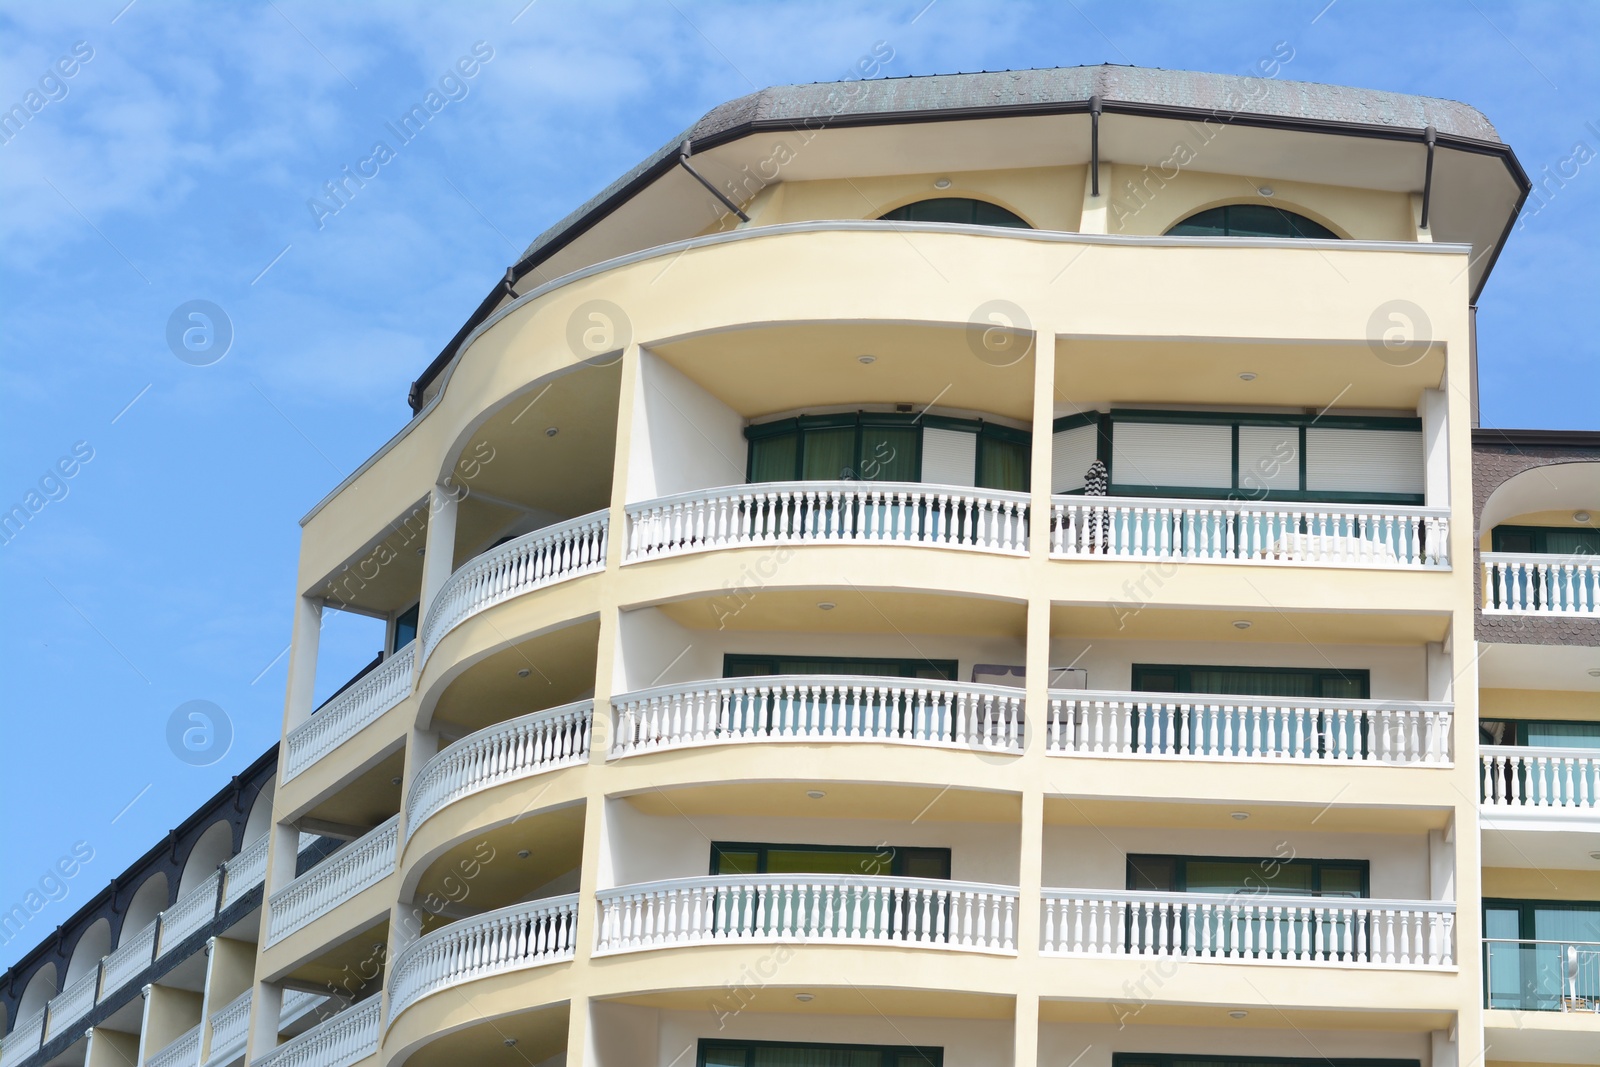 Photo of Exterior of beautiful building with balconies against blue sky